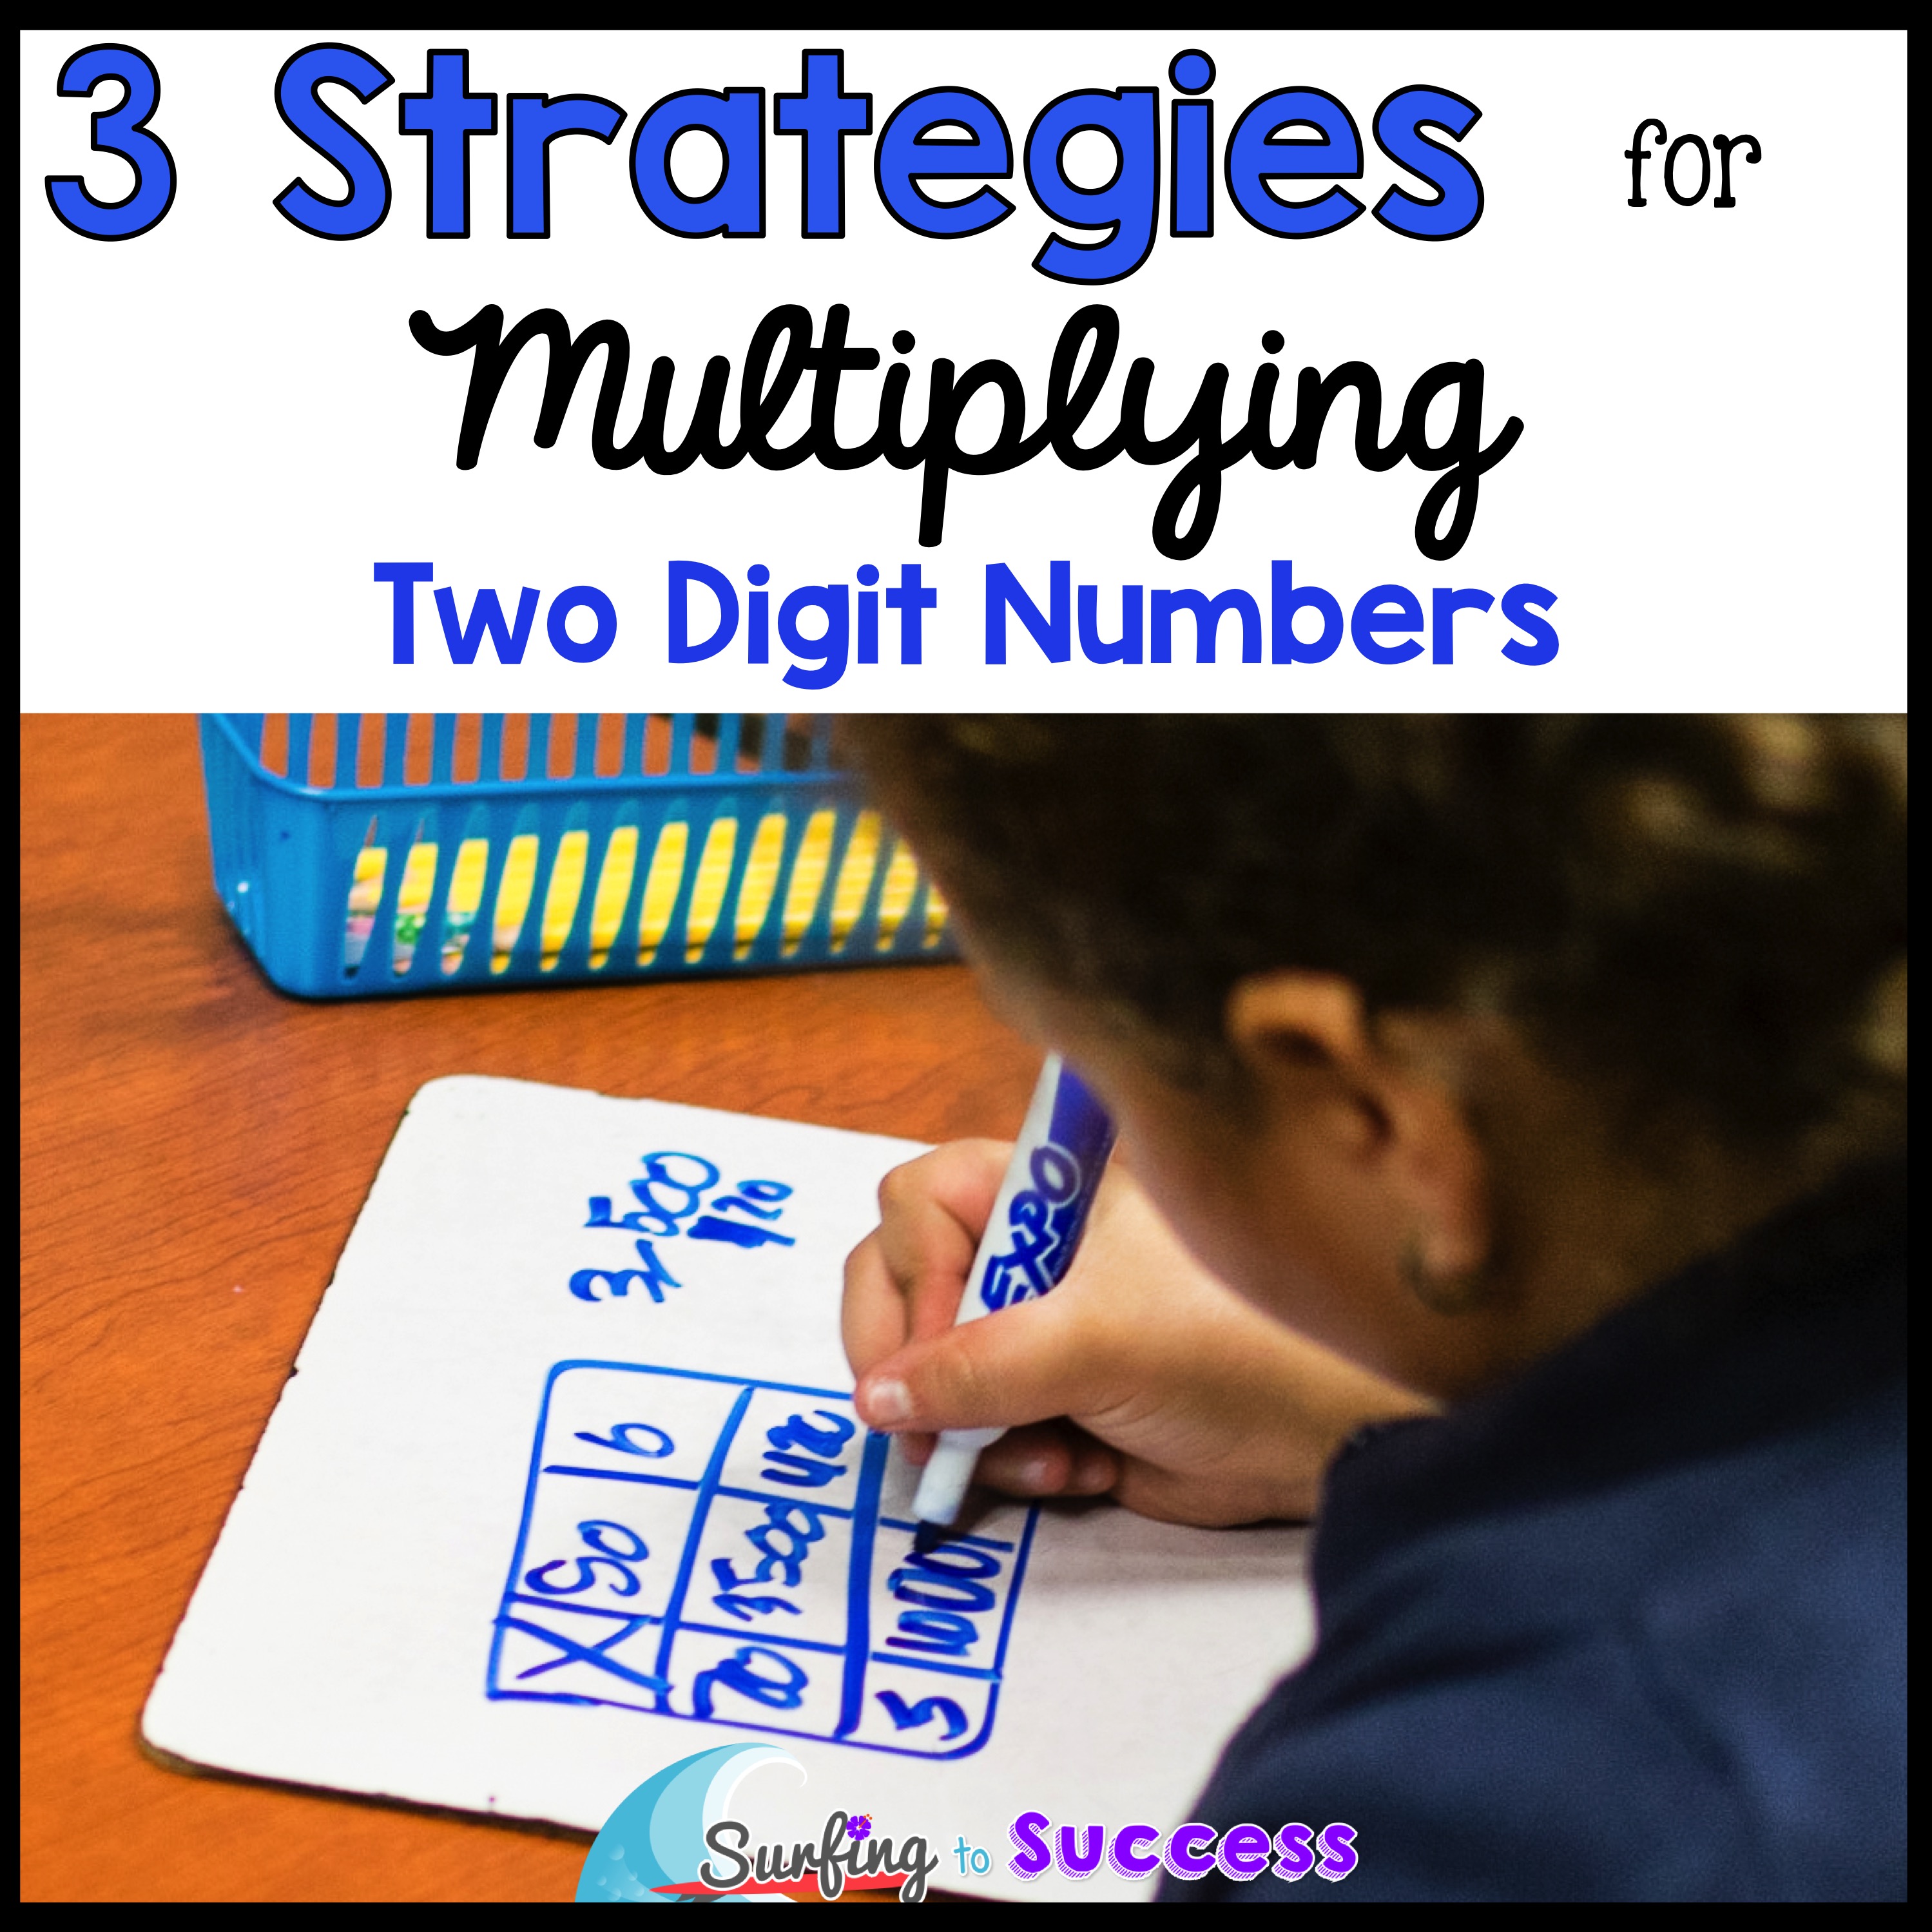 multiply-2-digit-numbers-3-strategies-surfing-to-success